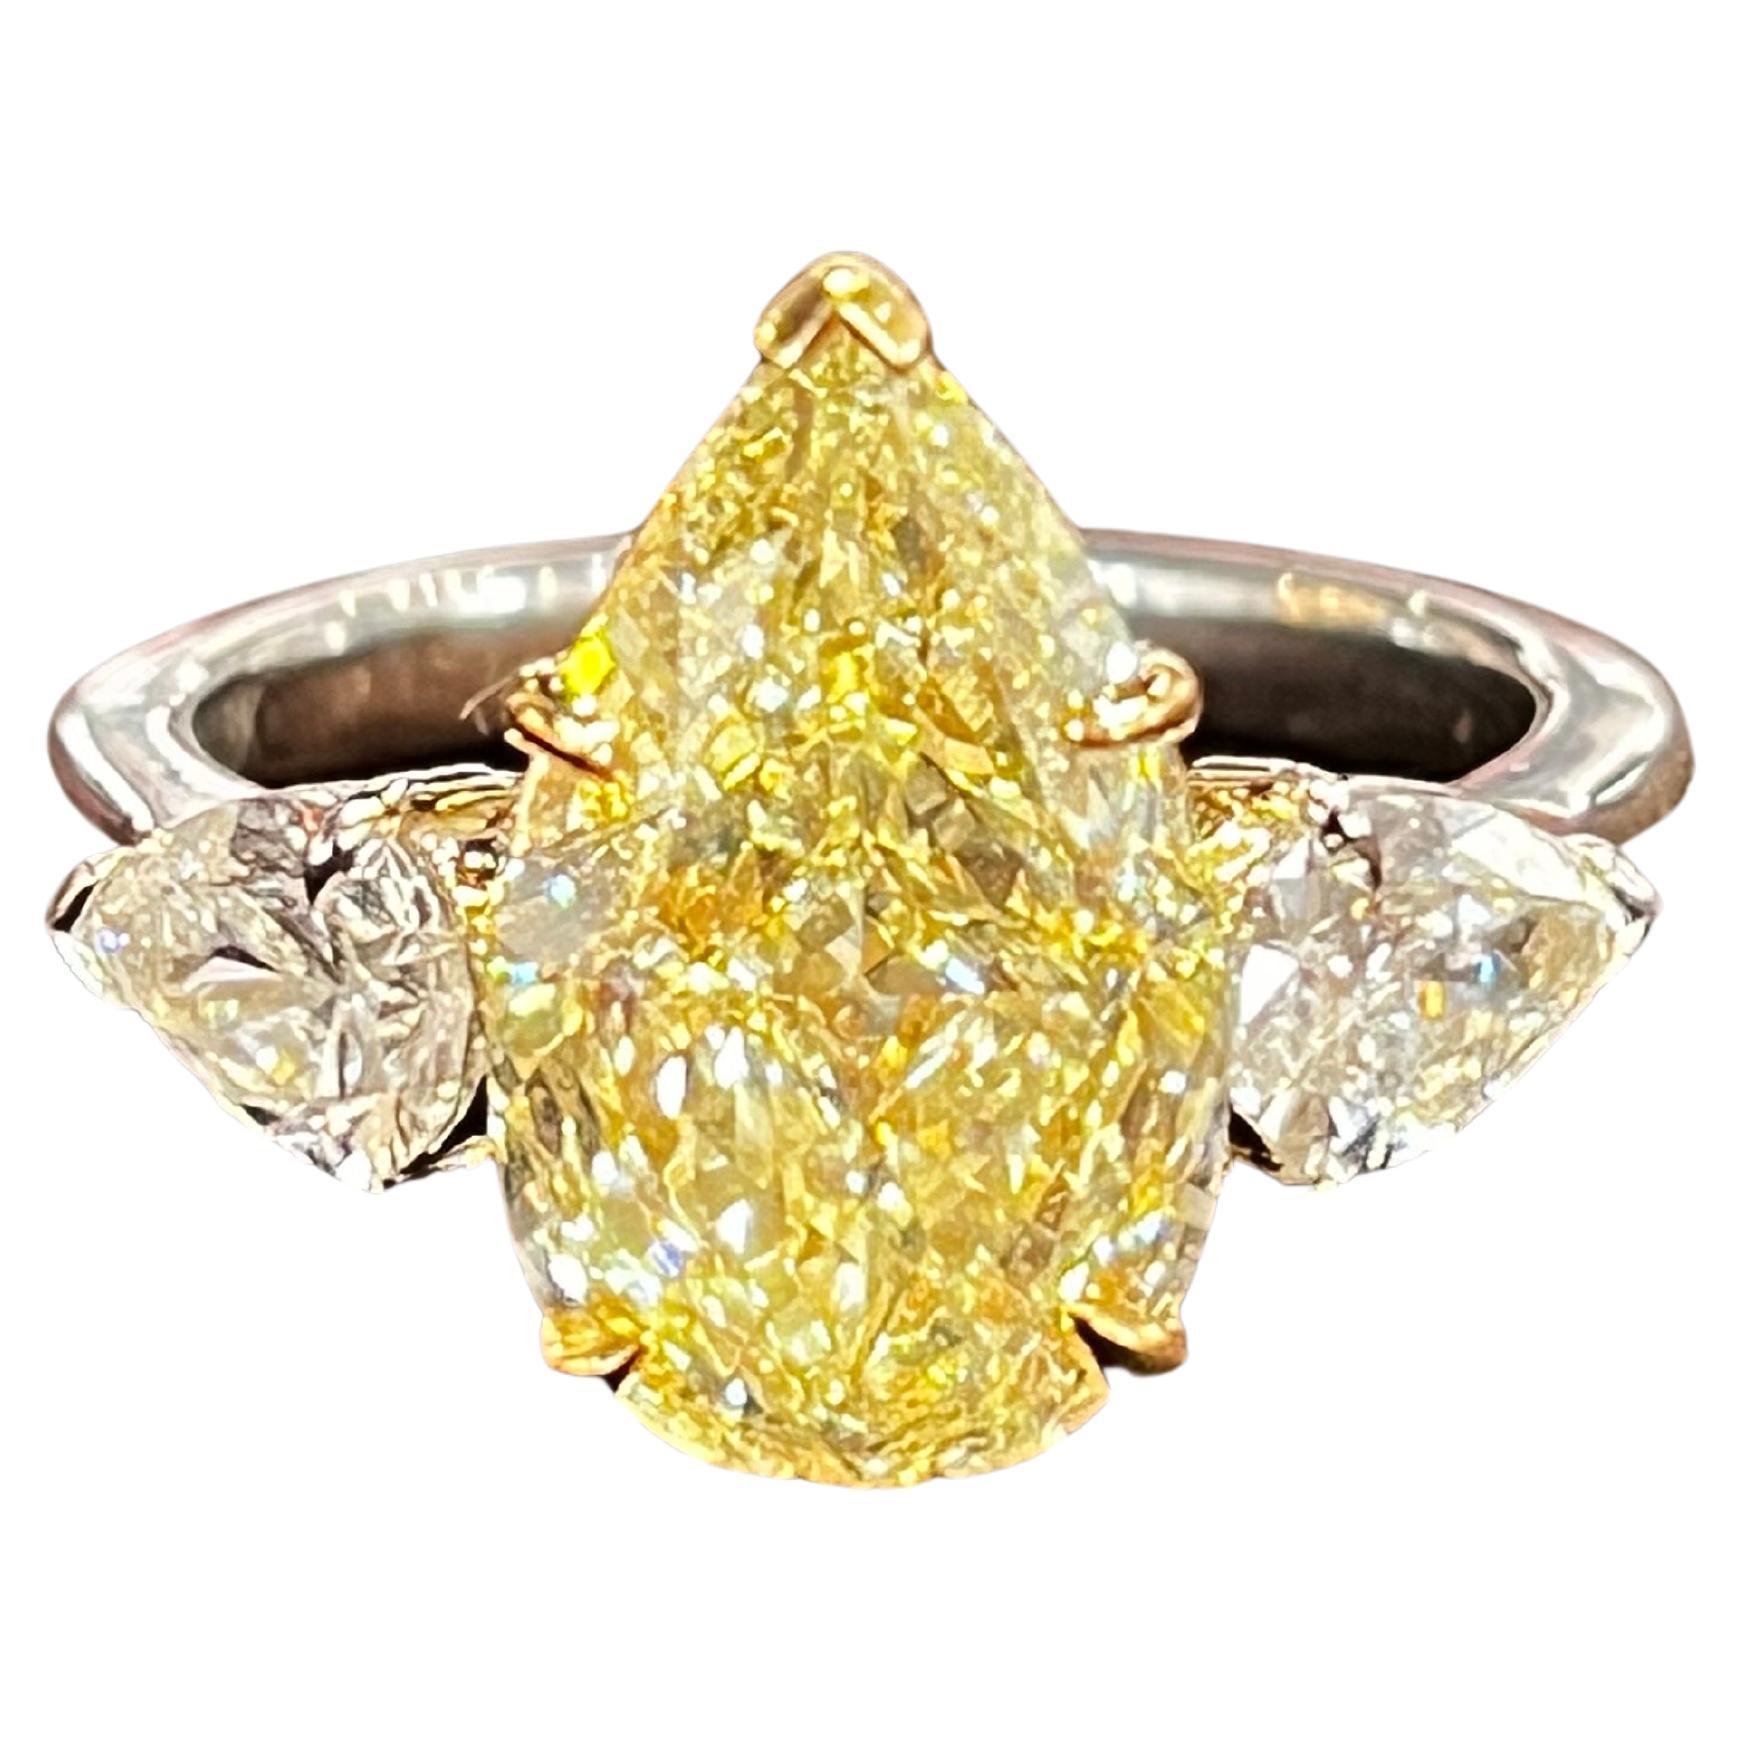 GIA 4.01cts Yellow Diamond Engagement Ring set in Platinum 950 and 18K Gold For Sale